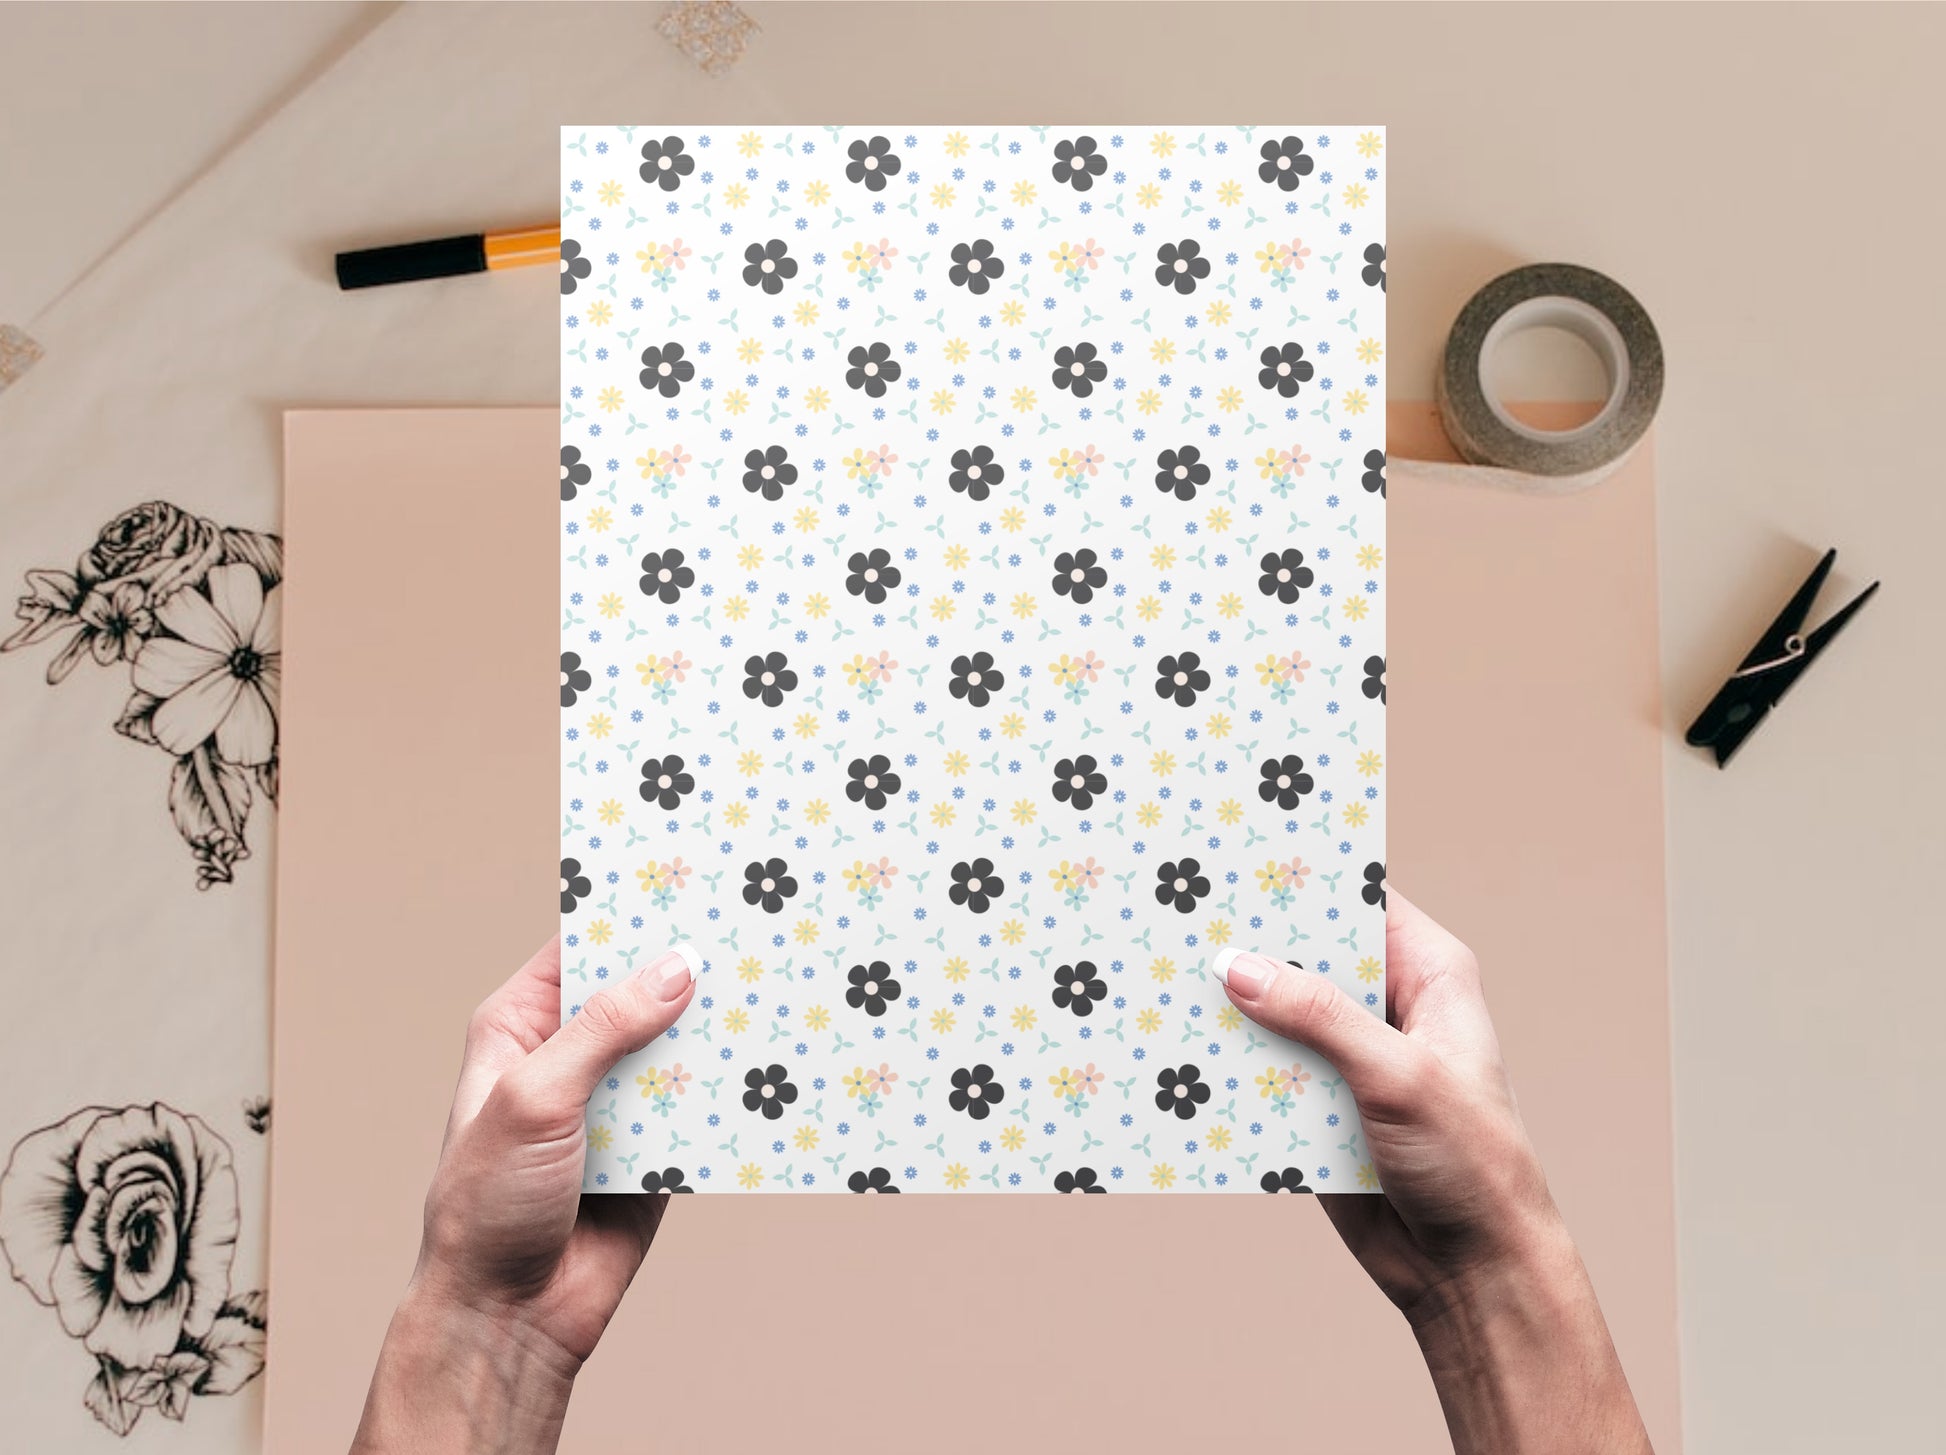 The dollhouse wallpaper pattern of black and pastel flowers is held by a woman above a desk